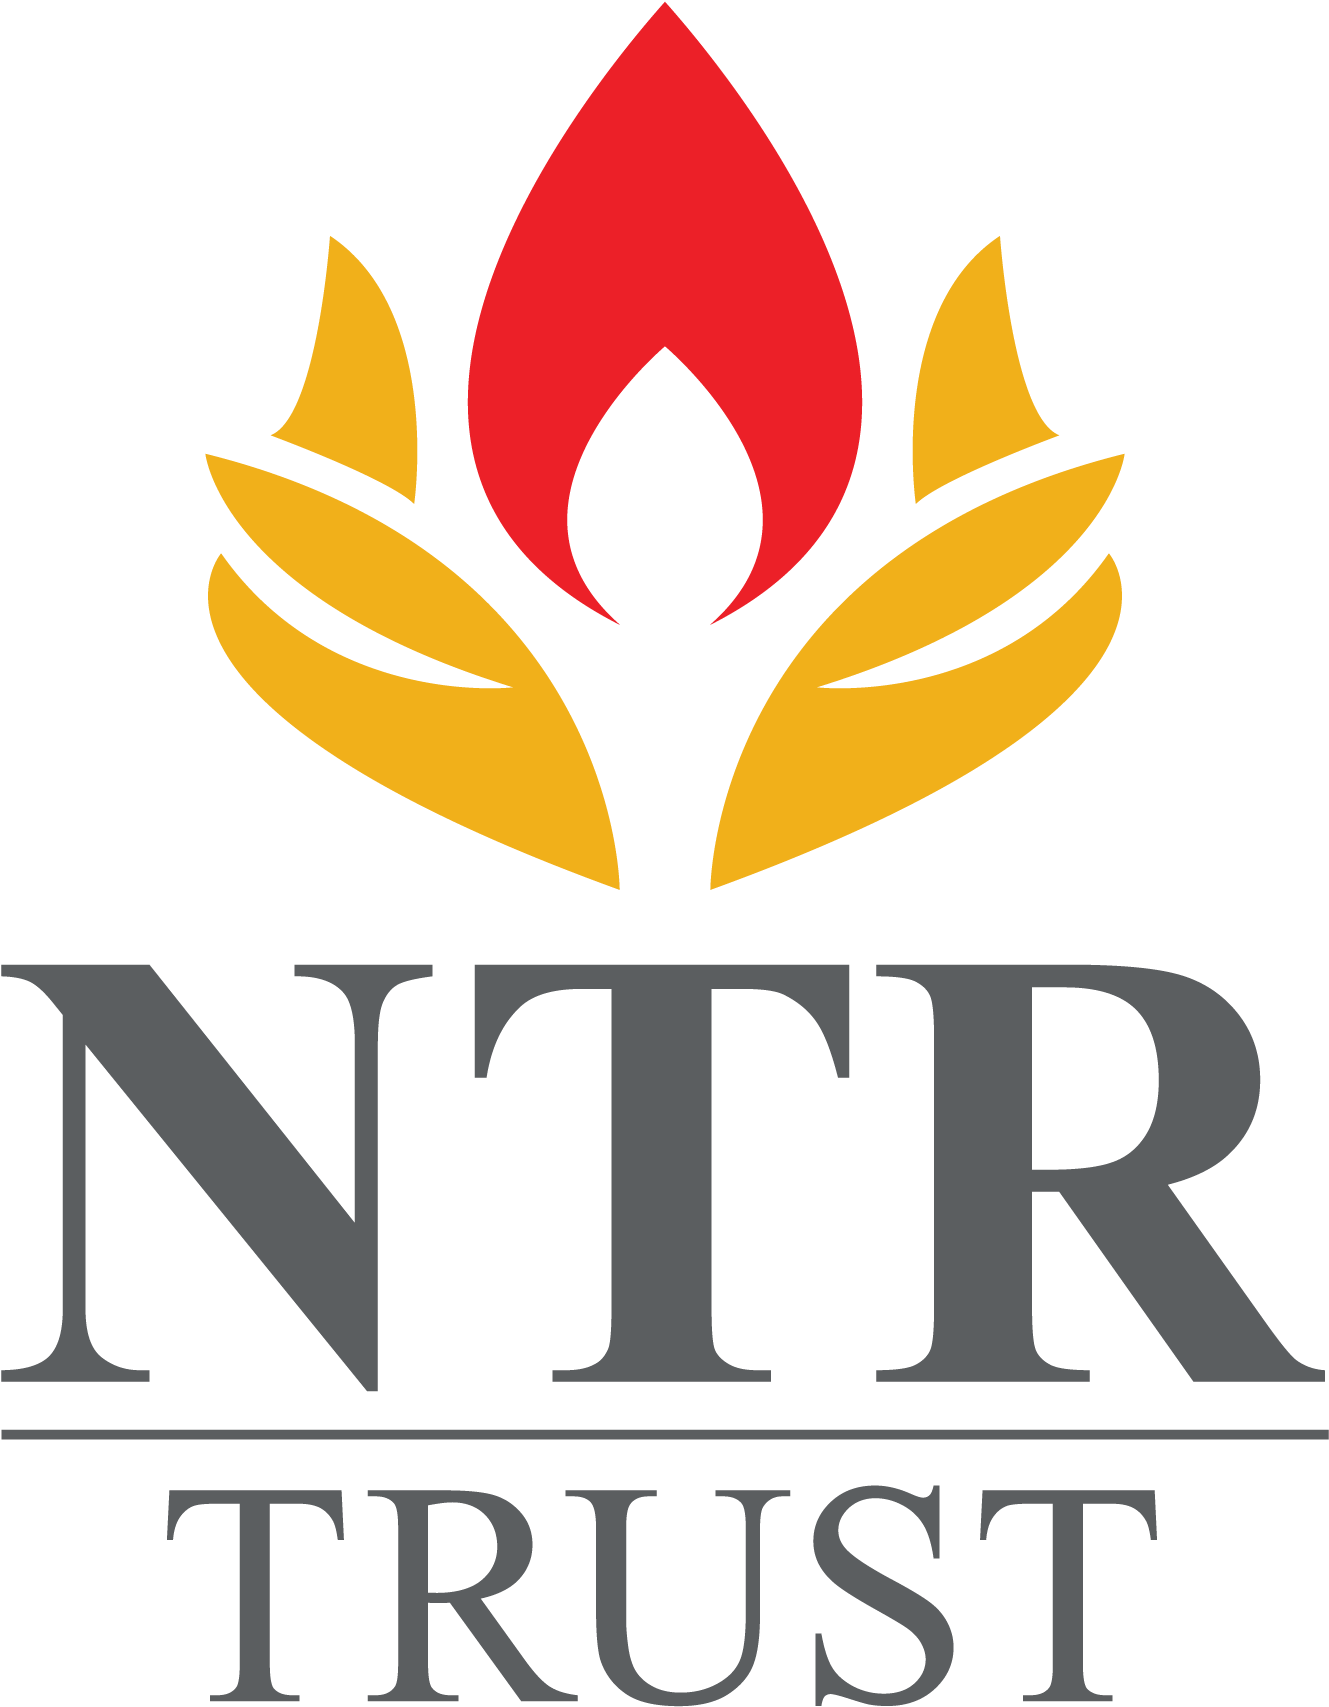 Download Ntr Trust Logo-01 - Ntr Trust Logo PNG Image with No Background -  PNGkey.com